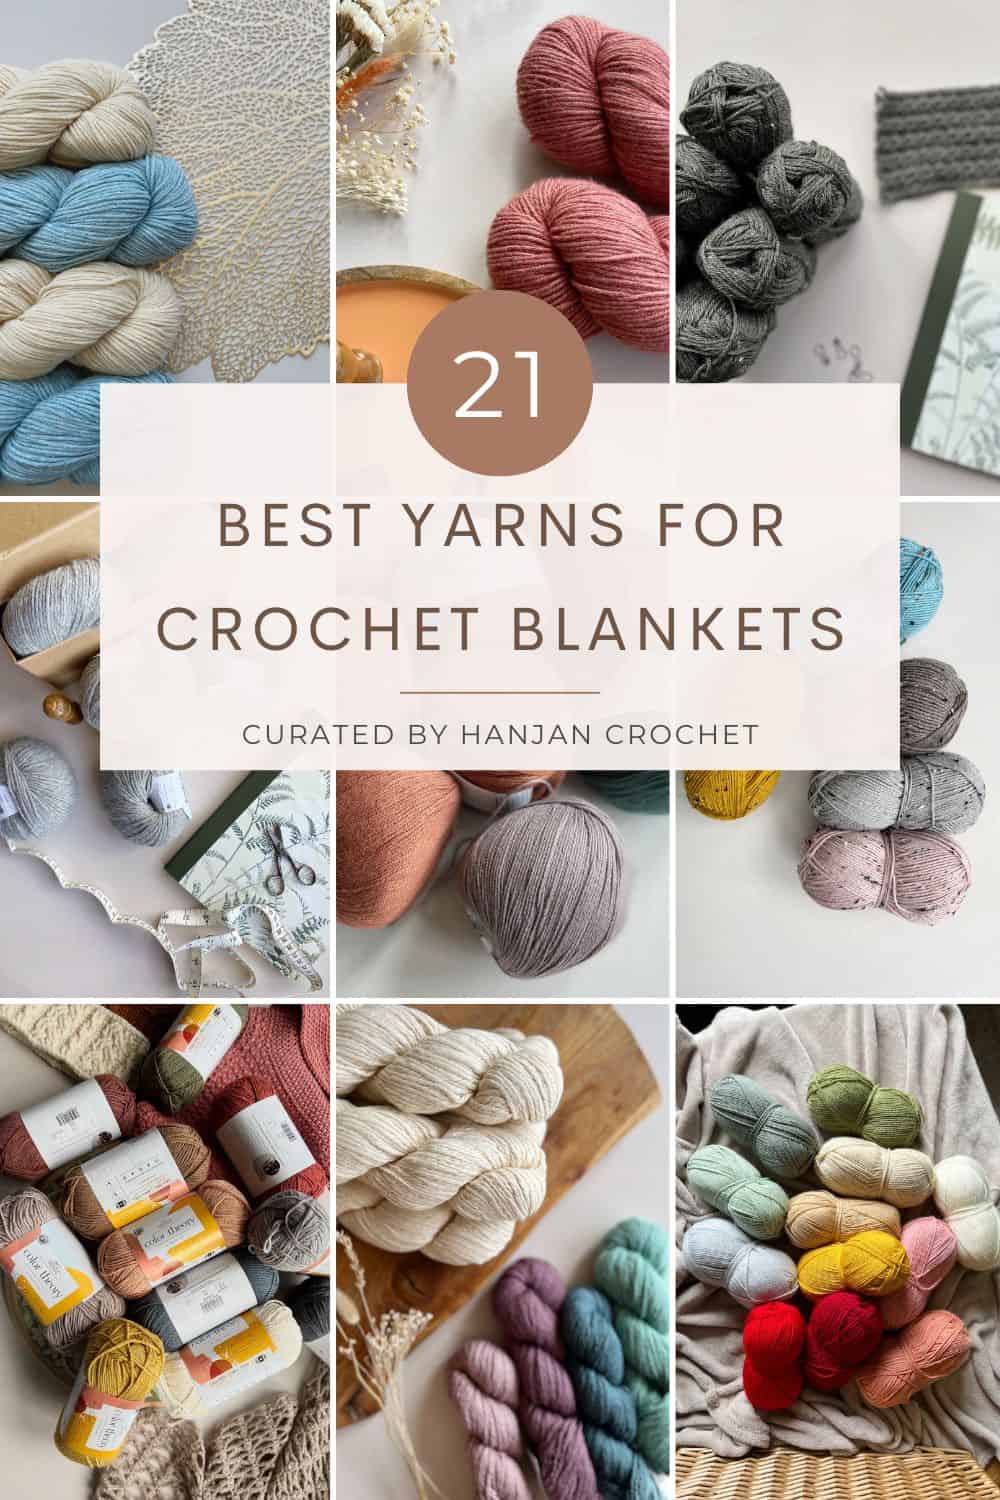 Selection of images showing best yarn for crochet blankets